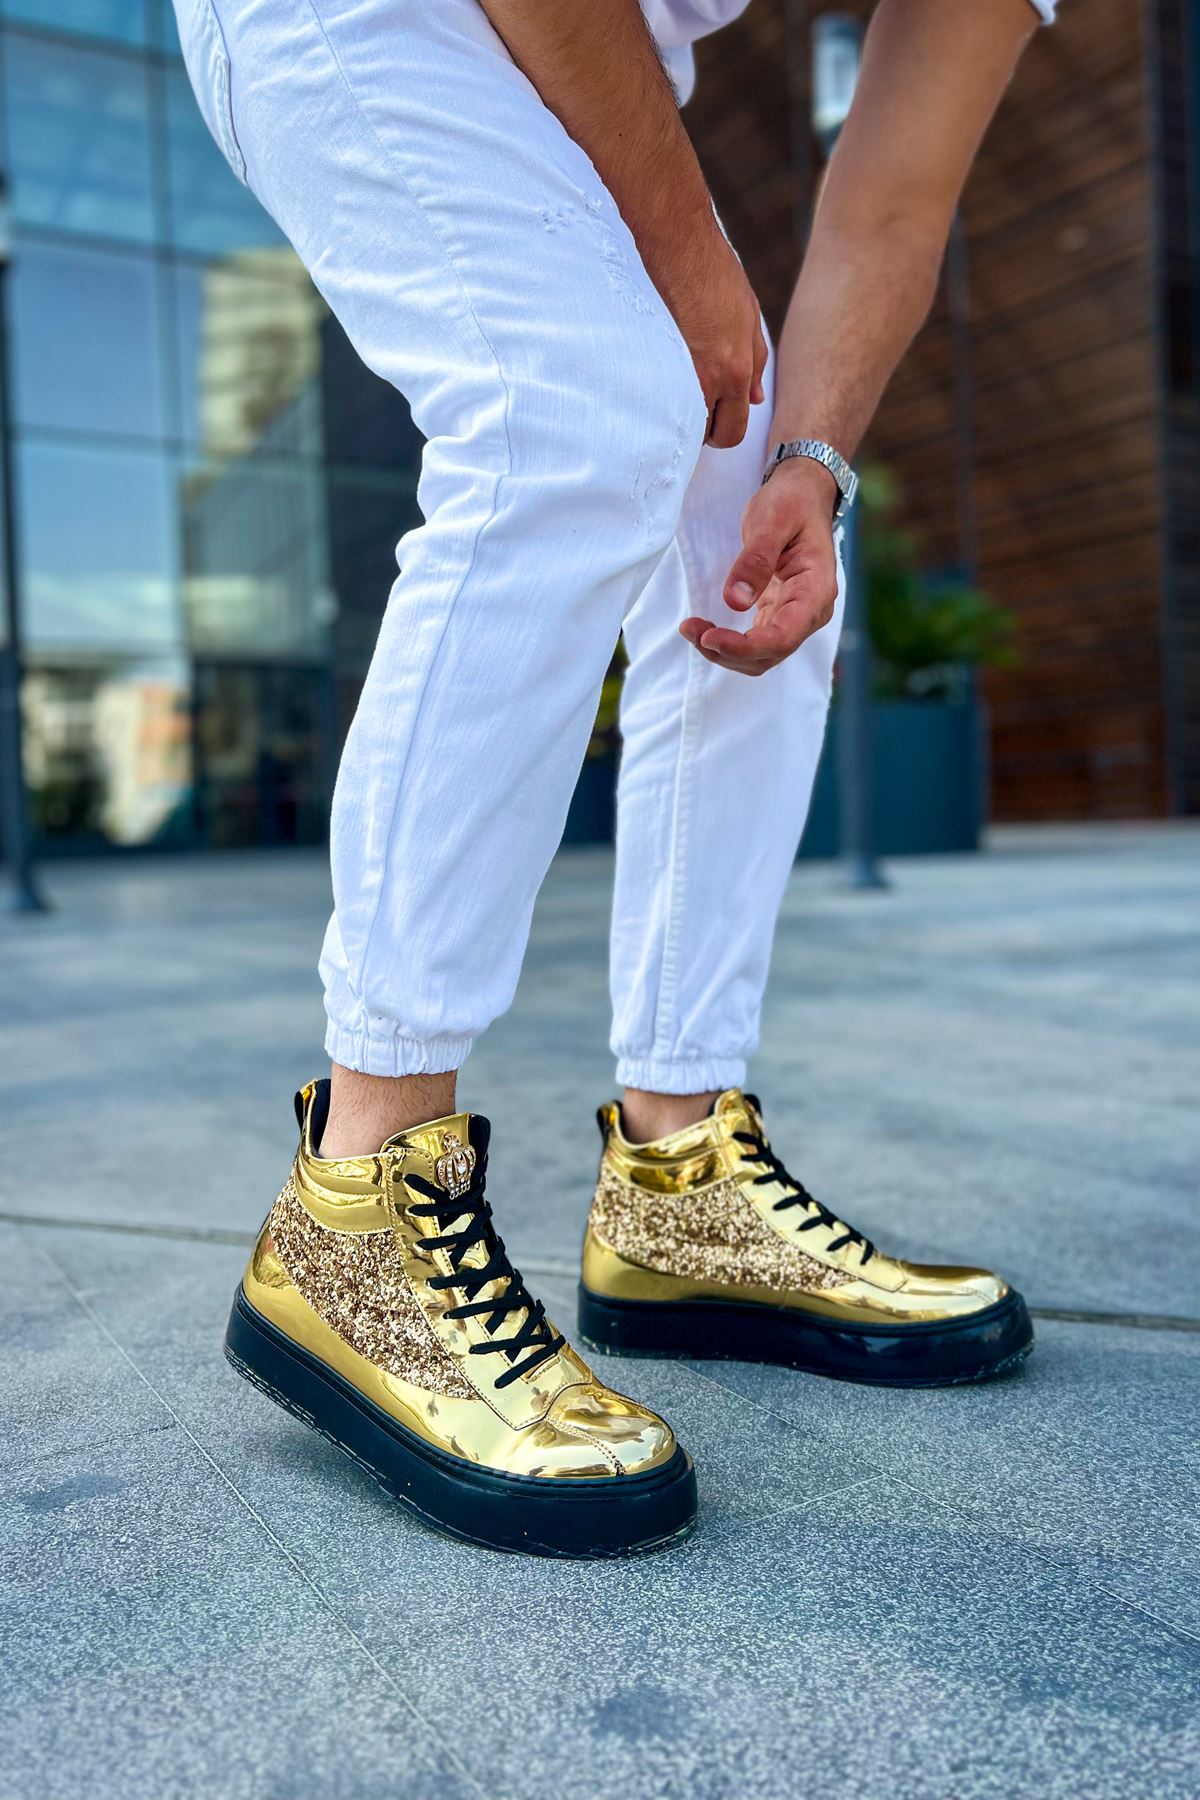 CH973 Majesty ST Men's Sneakers Shoes Boots GOLD - STREET MODE ™